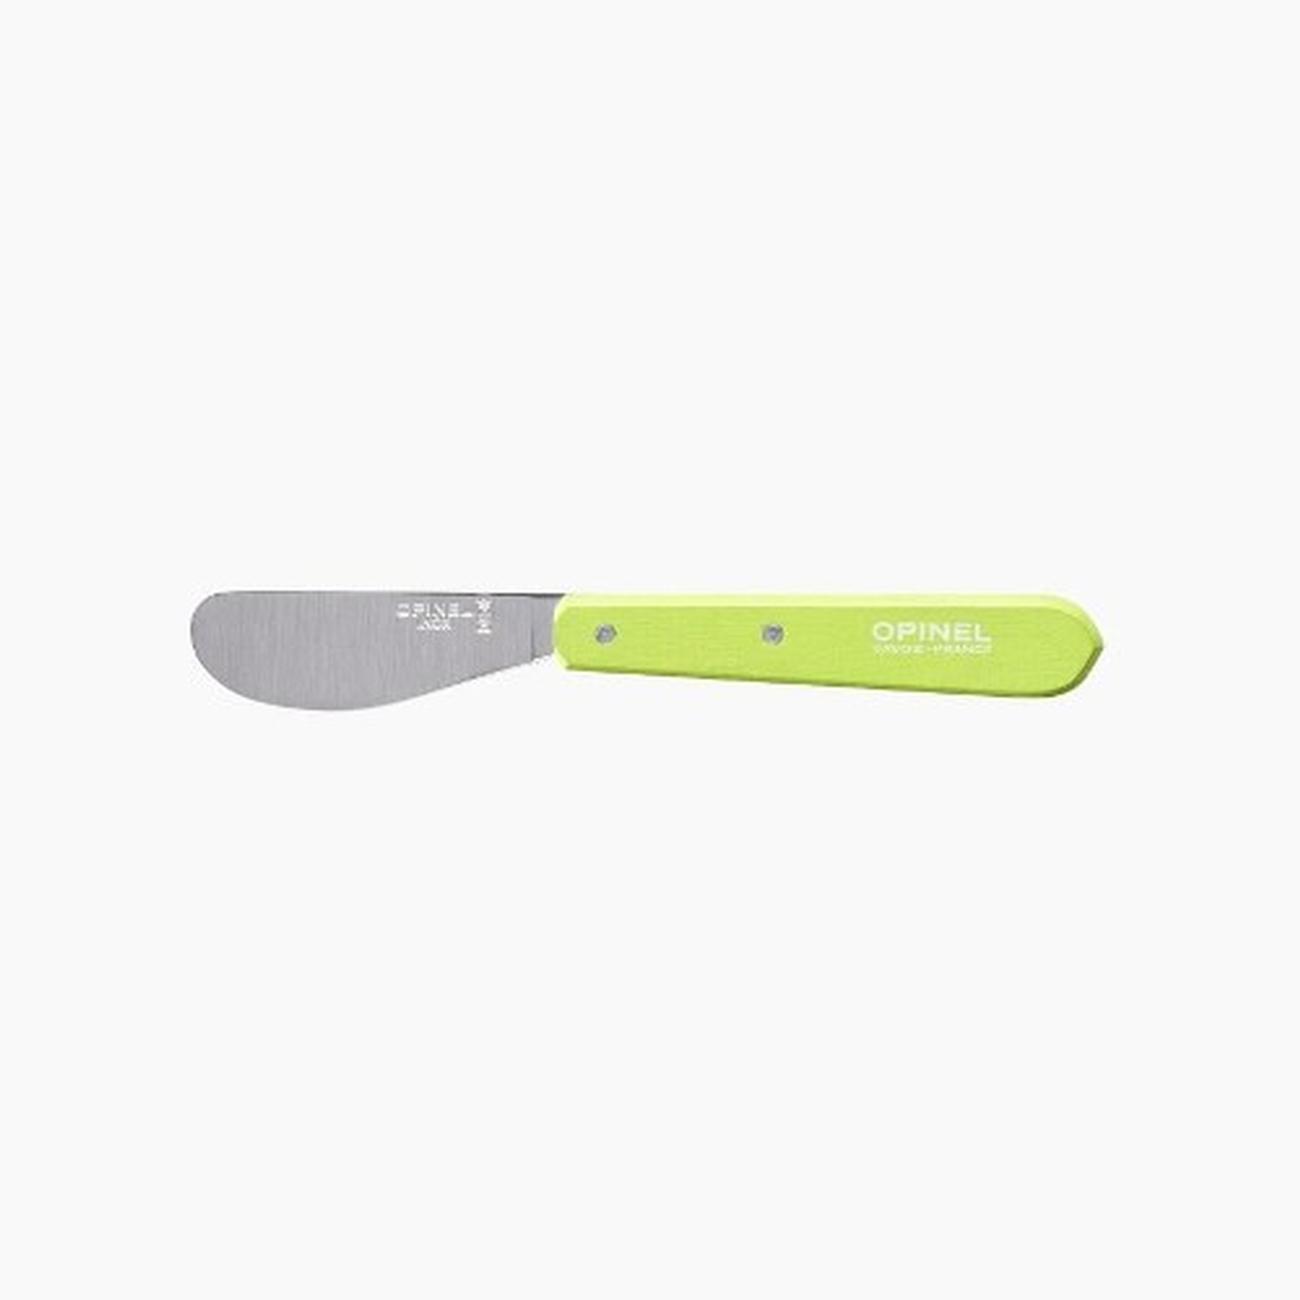 opinel-no117-spreading-knife-green-apple - Opinel No.117 Spreading Knife Green Apple